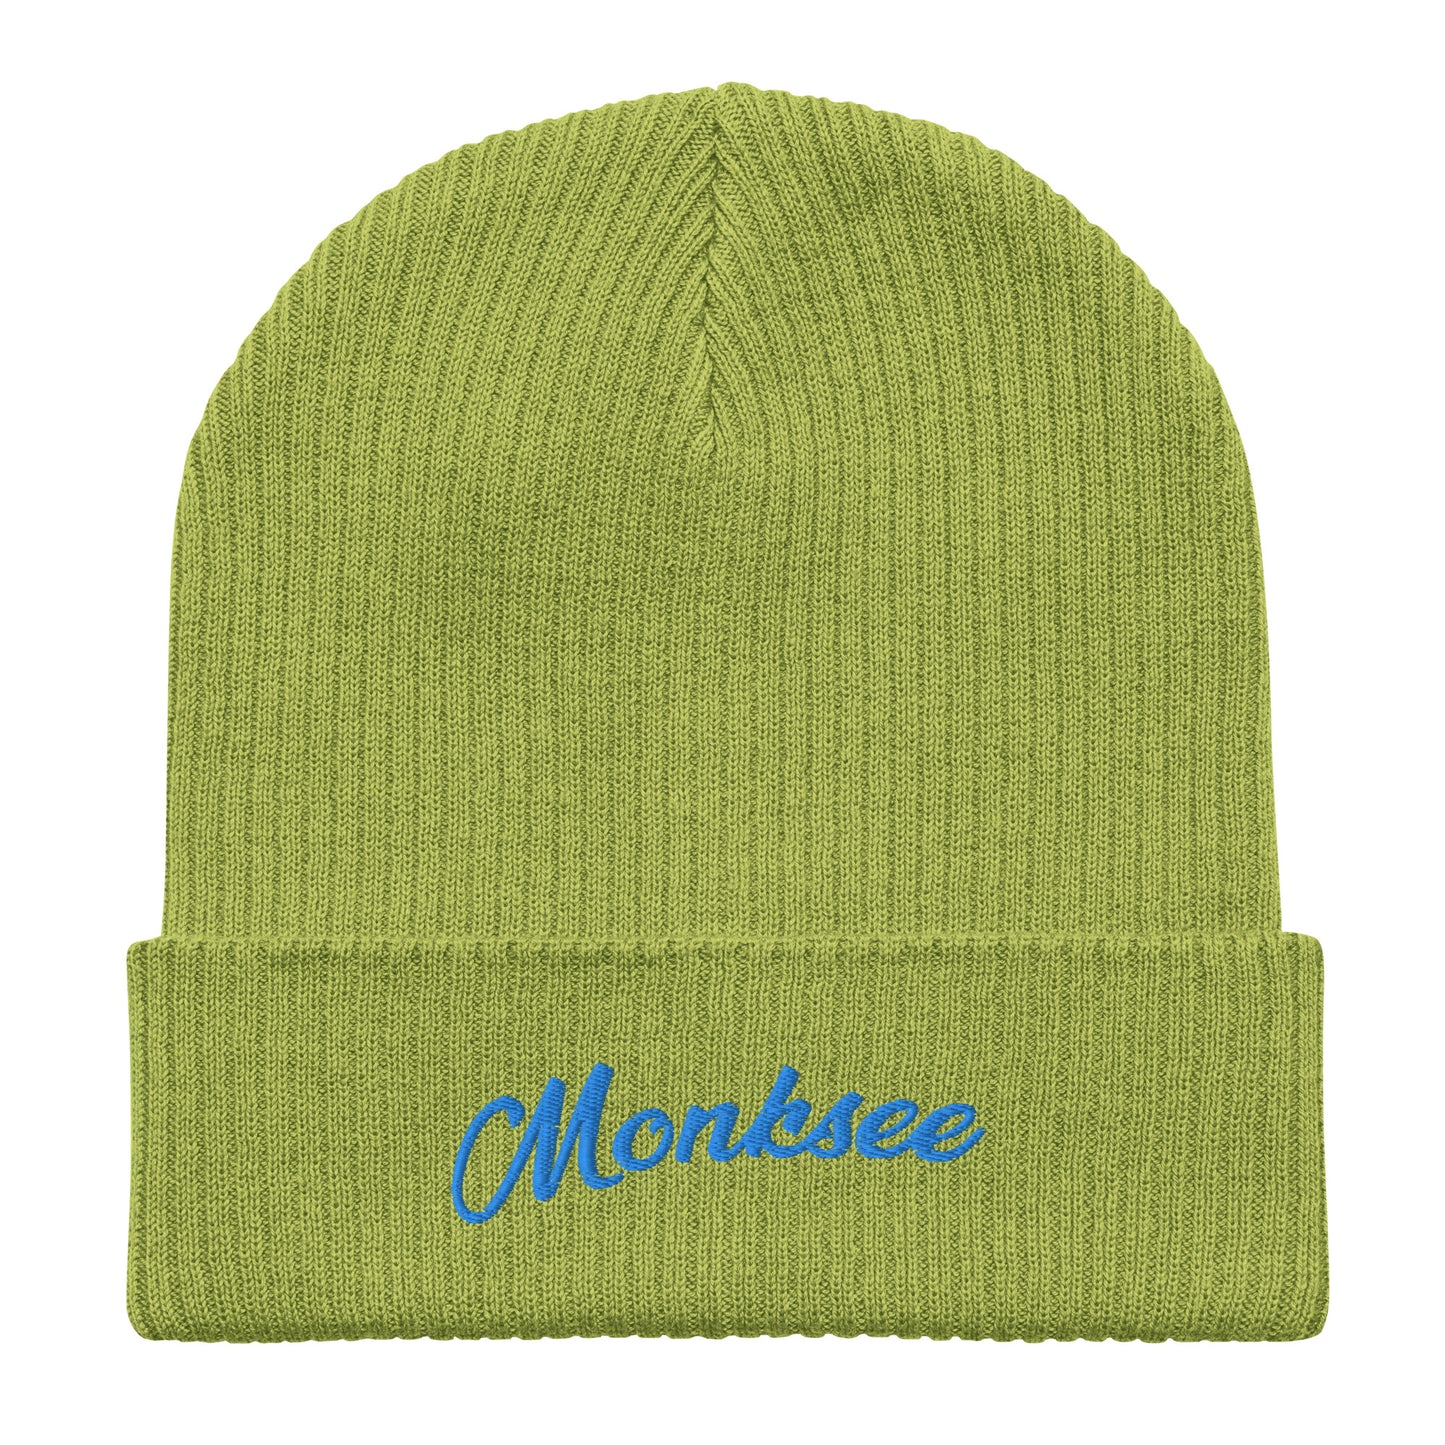 Lime Organic ribbed beanie by Monksee.